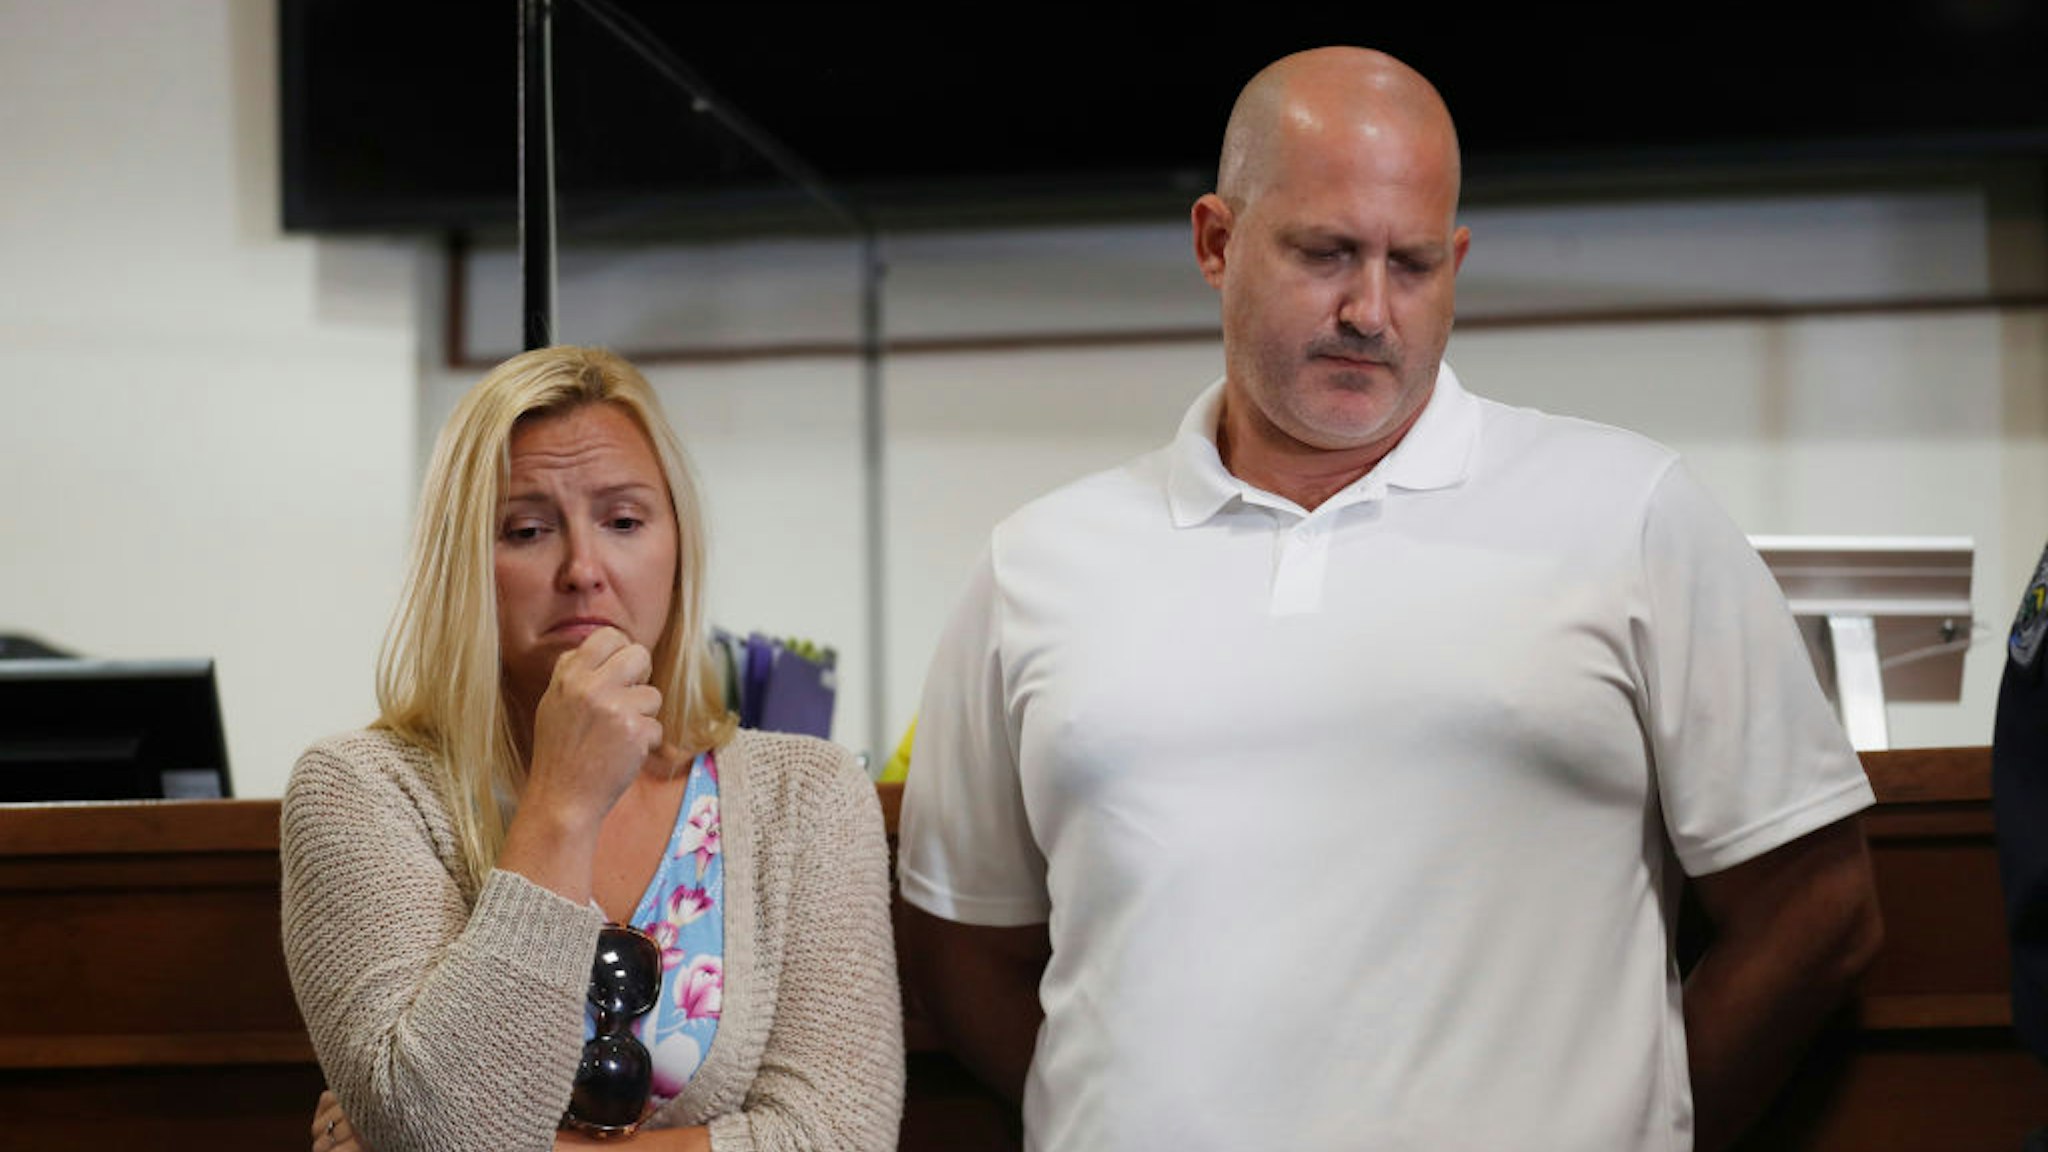 Tara Petito (L) and Joe Petito react while the City of North Port Chief of Police Todd Garrison speaks during a news conference for their missing daughter Gabby Petito on September 16, 2021 in North Port, Florida.